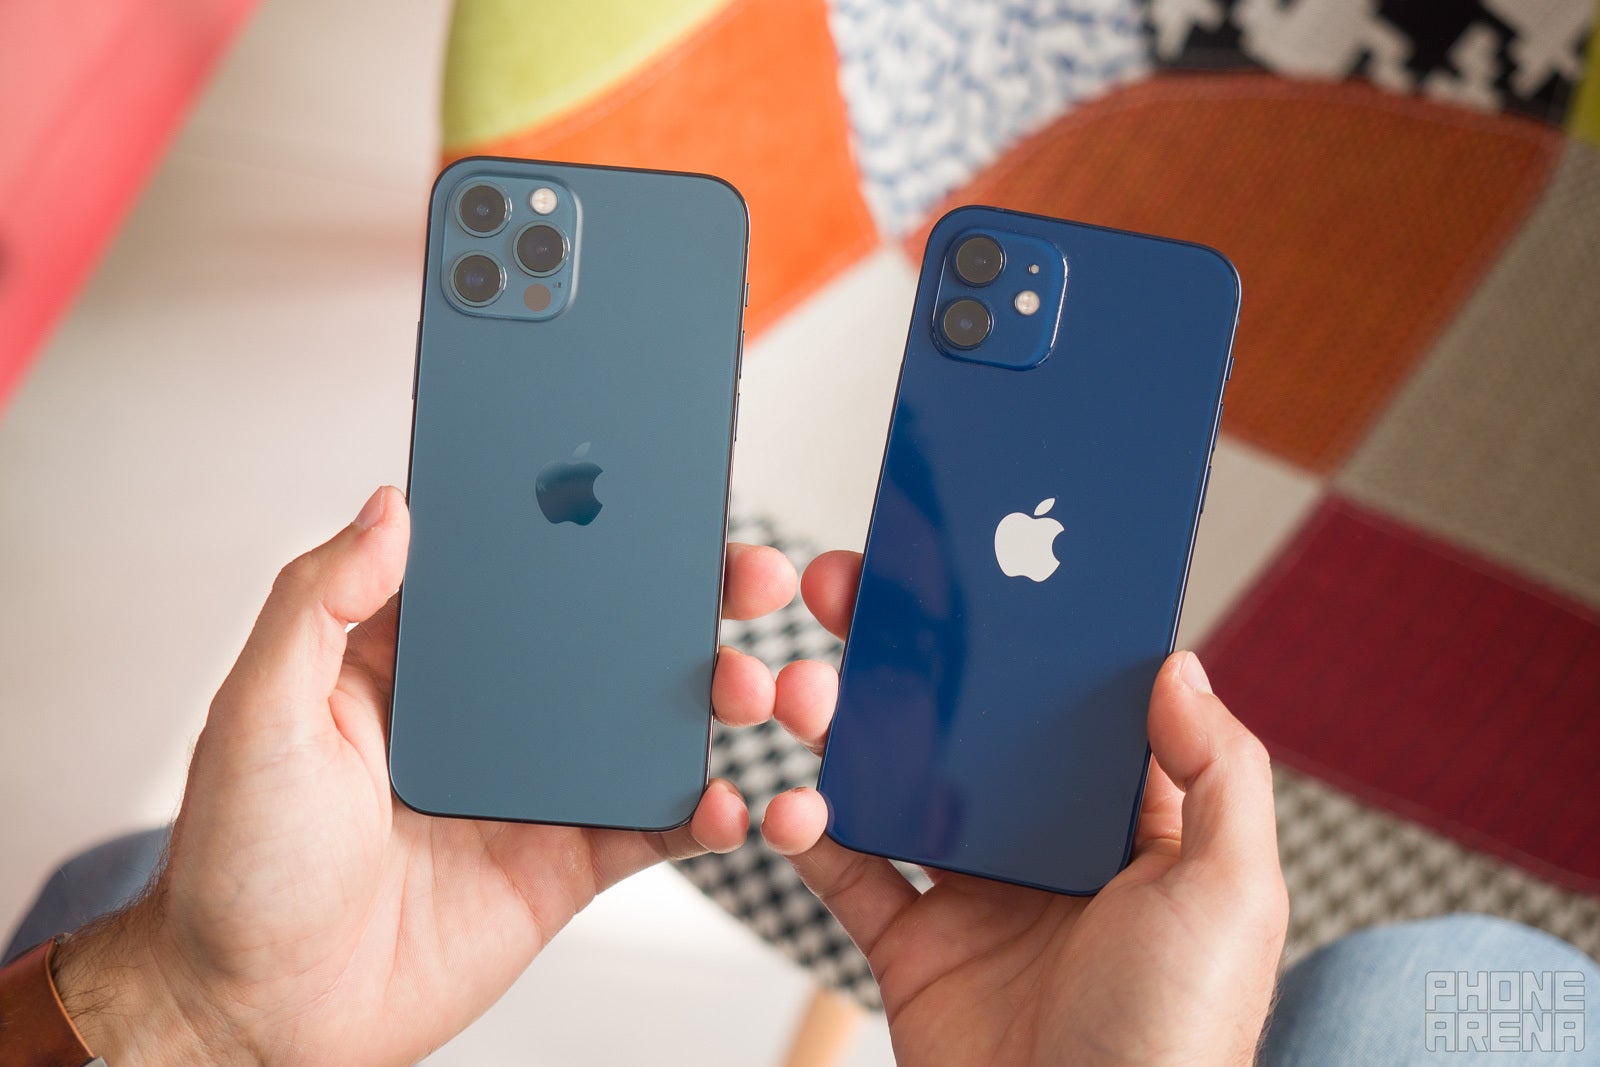 The iPhone 12 Blue is slightly darker blue color than the iPhone 12 Pro - iPhone 12 vs iPhone 12 Pro